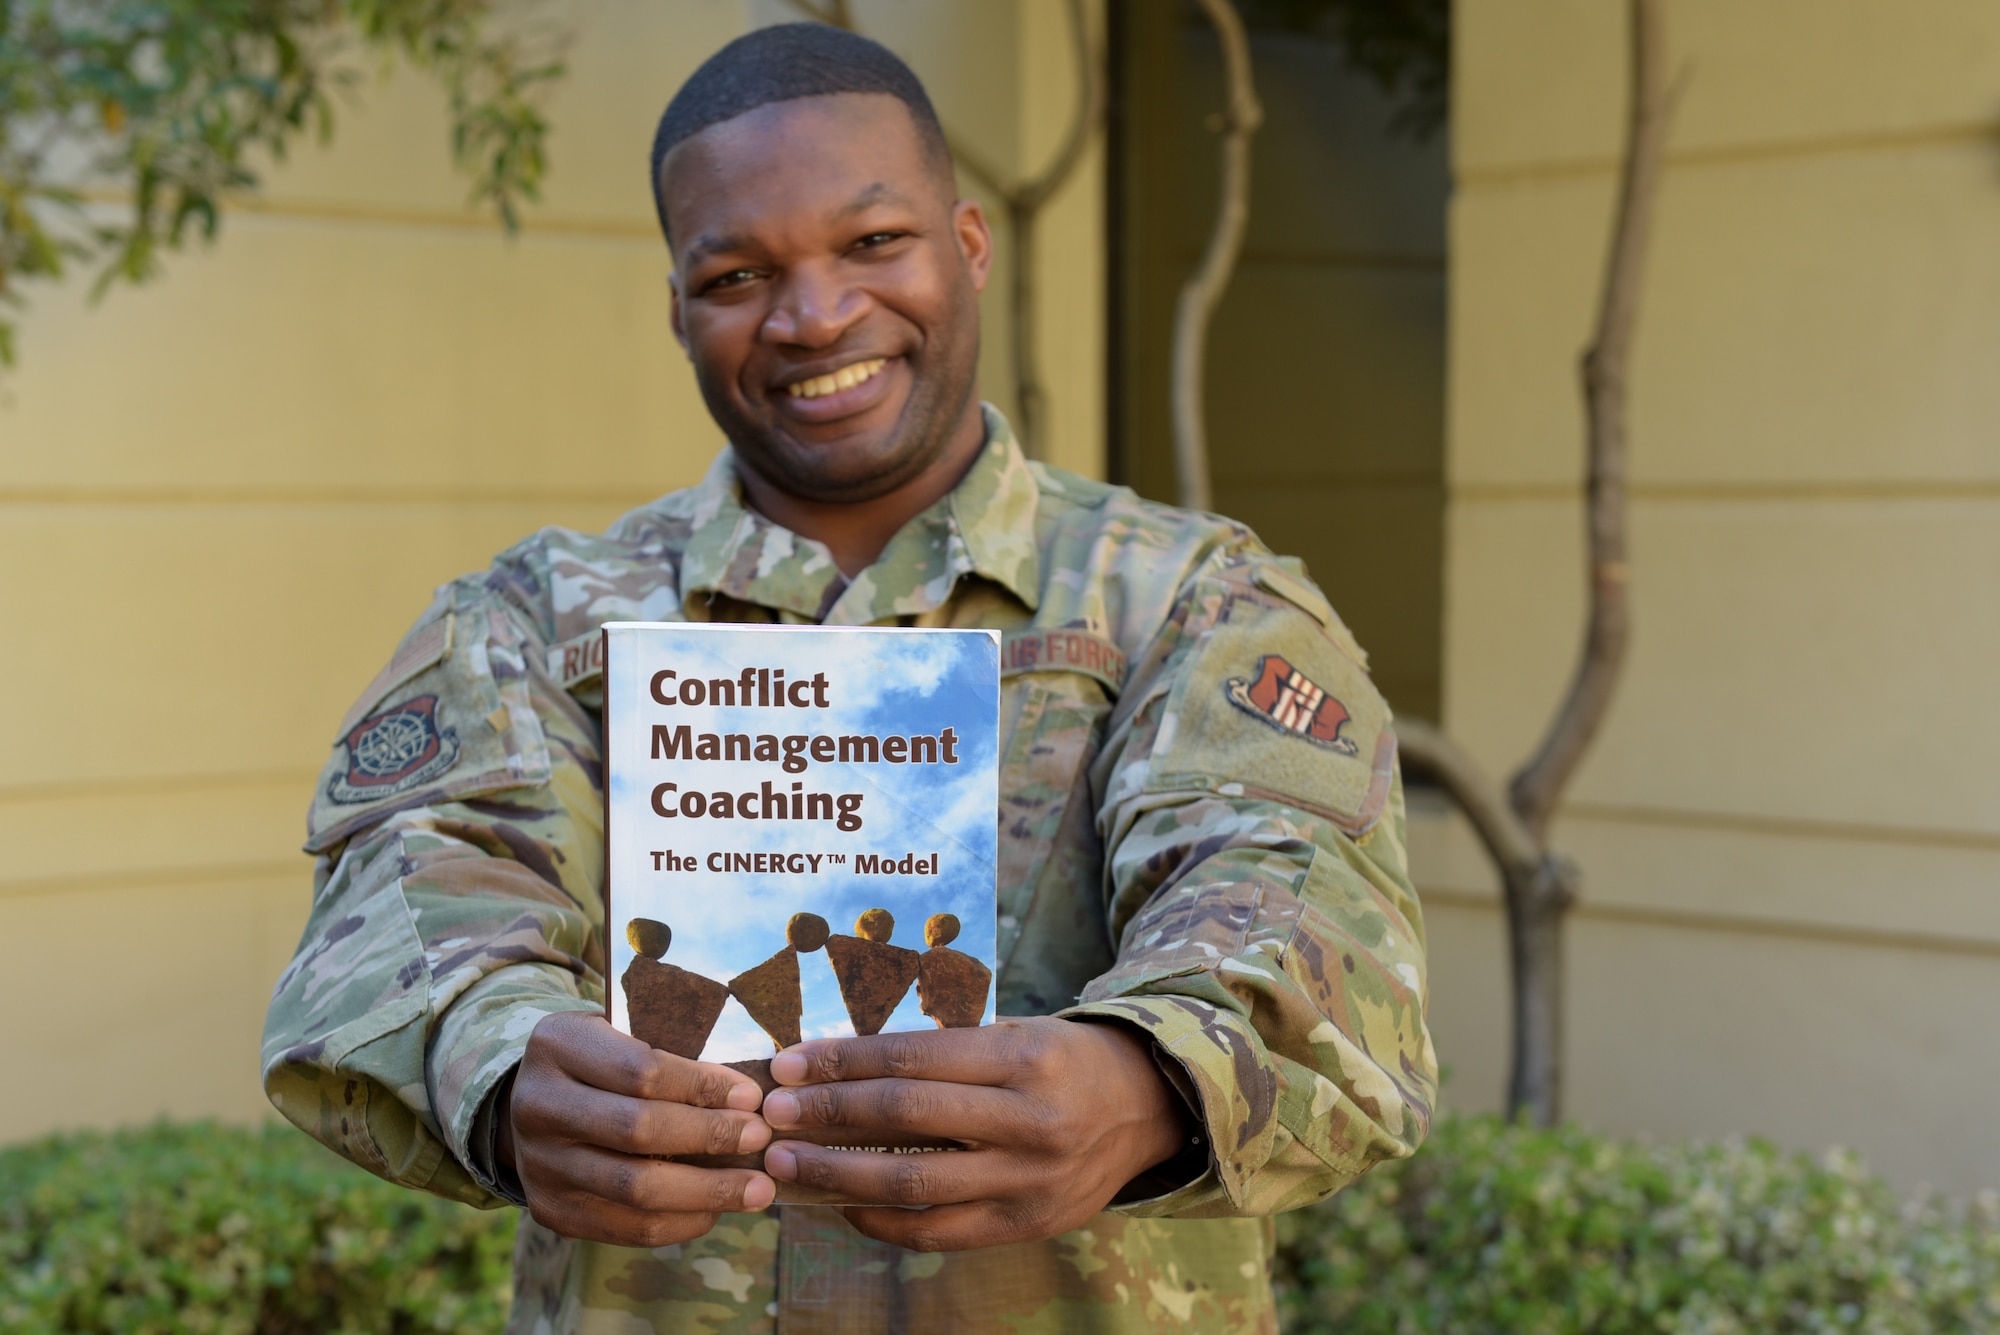 U.S. Air Force Tech. Sgt. Piankhy Richberg, 60th Air Mobility Wing Equal Opportunity NCO in charge, holds a conflict management coaching book Dec. 17, 2018, at Travis Air Force Base, California. The EO office implemented conflict management coaching in June 2018. Since the program’s inception, 11 people have used the program. (U.S. Air Force photo by Tech. Sgt. James Hodgman)